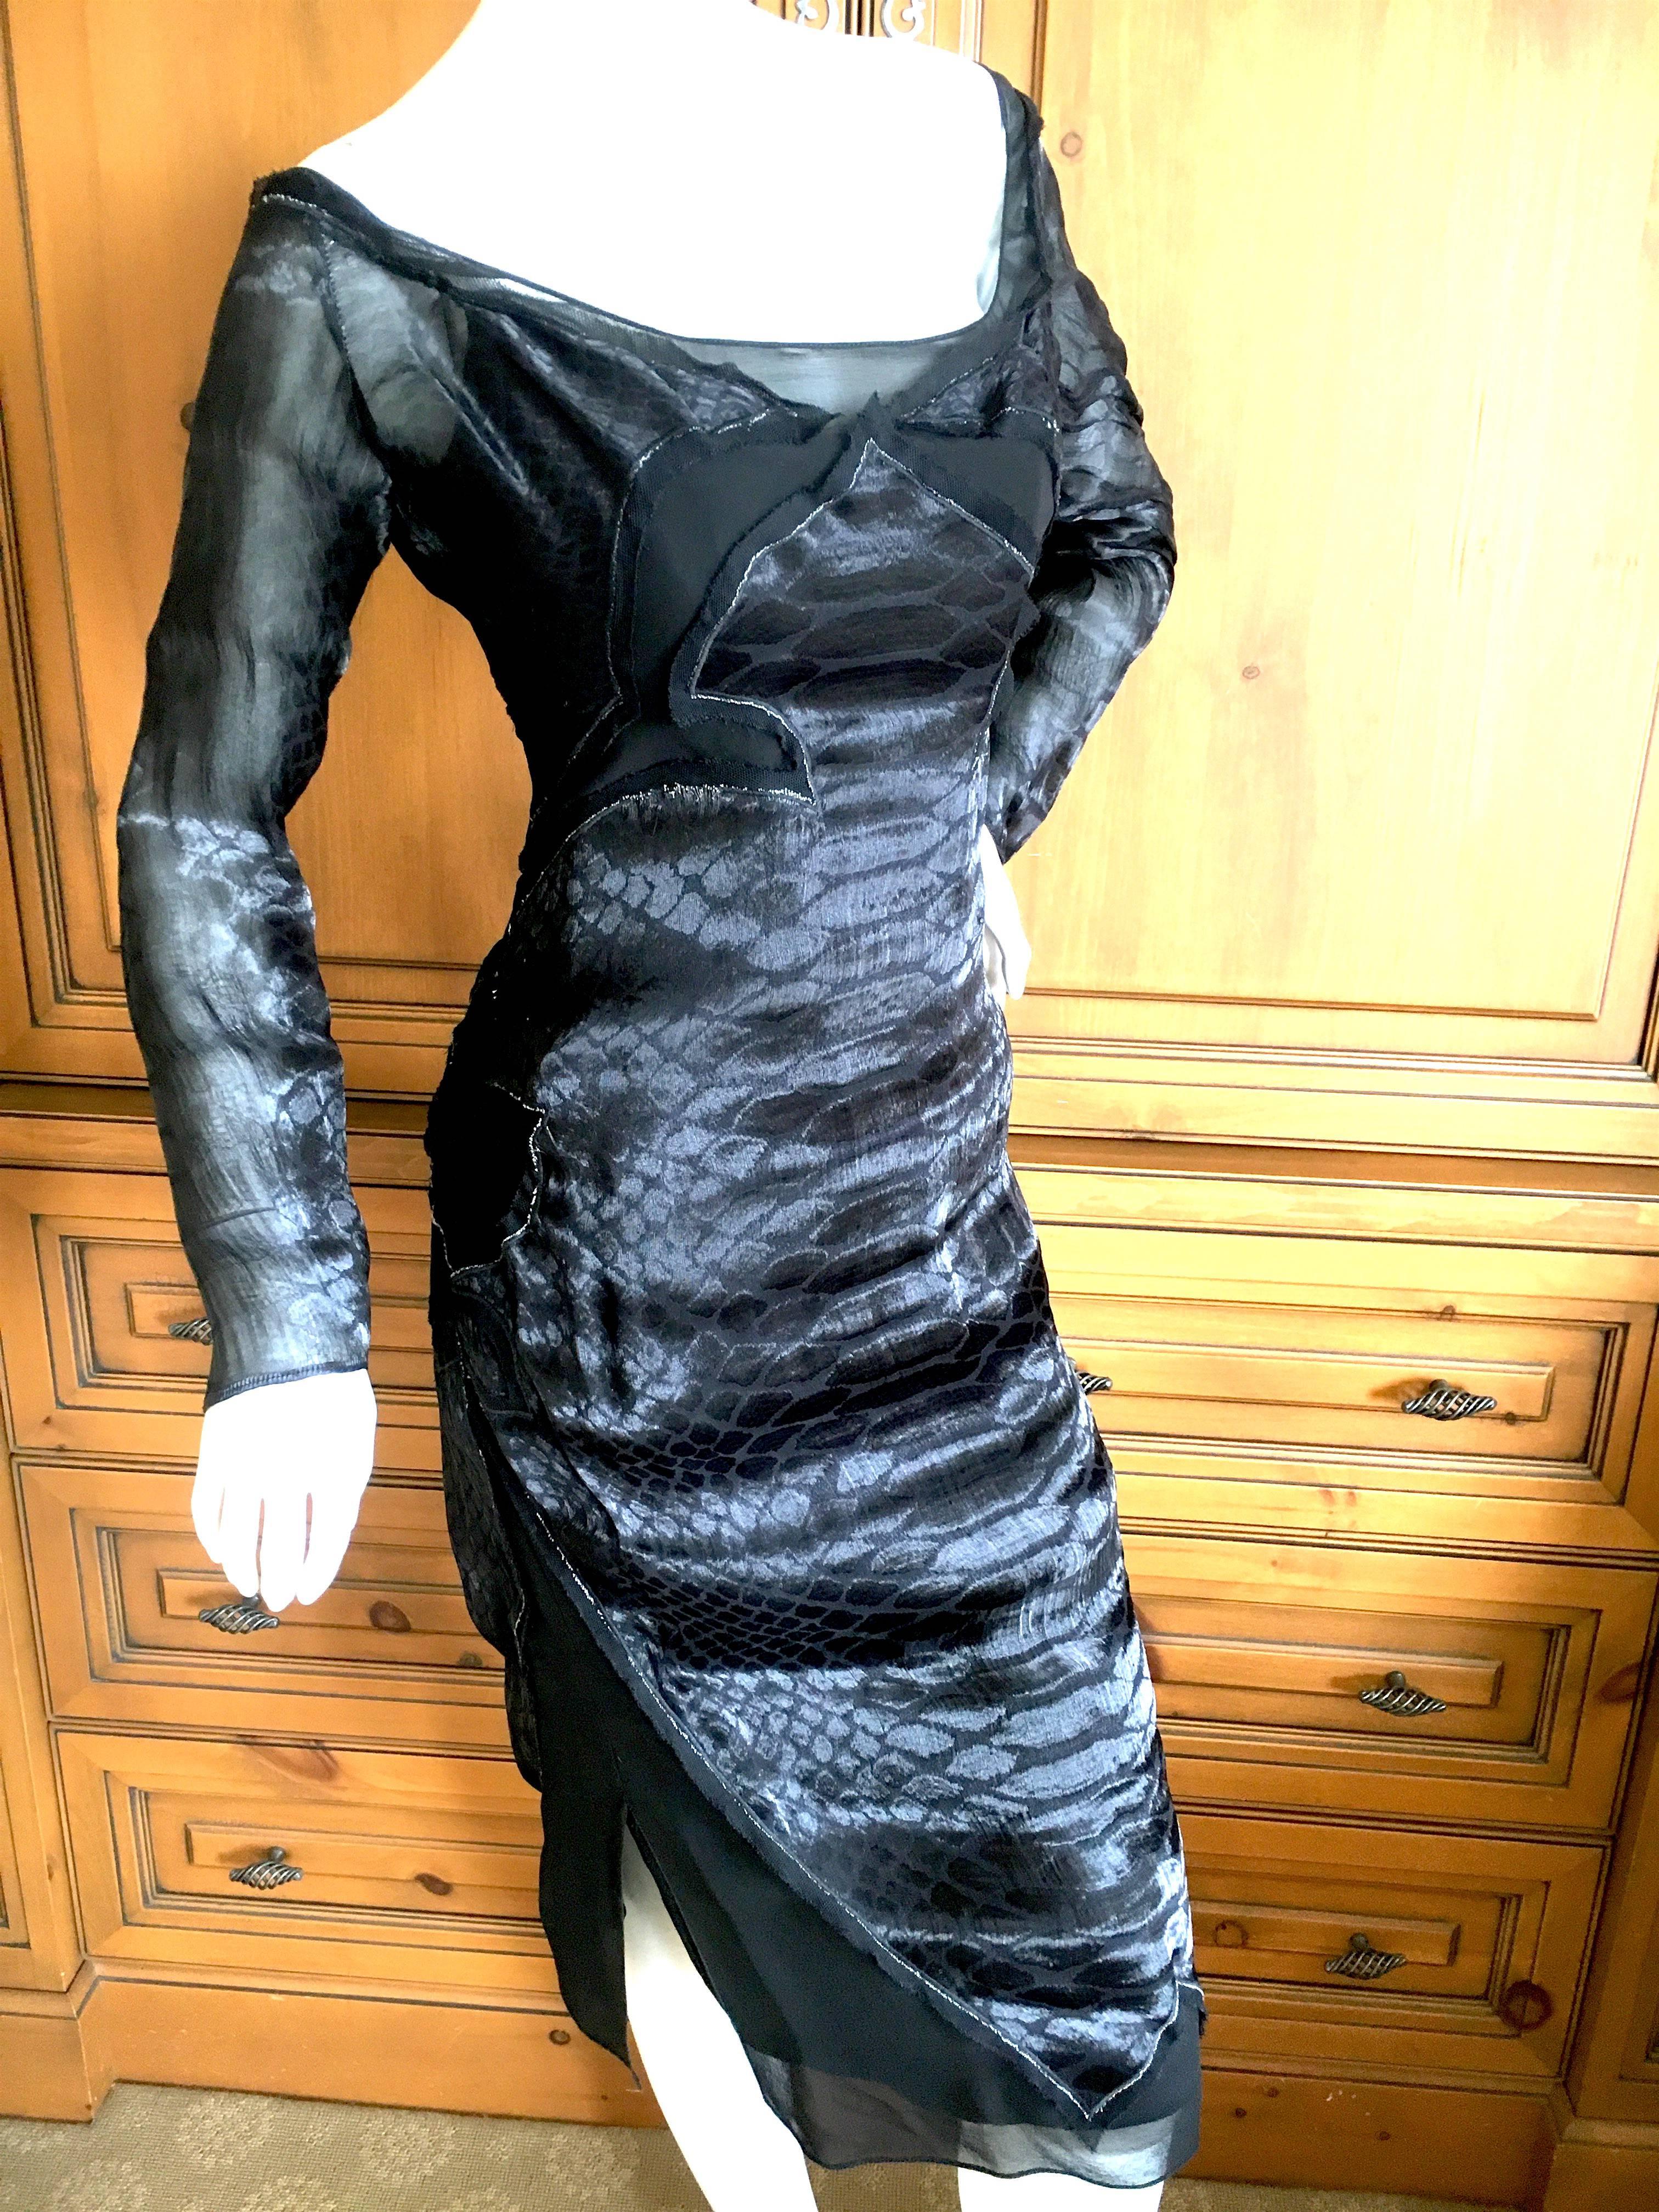 Yves Saint Laurent by Tom Ford Reptile Print Black Dress Fall 2004.
Wonderful Tom Ford YSL with sheer panels and silver threads , much prettier than the photos .
Size 42
Bust 40